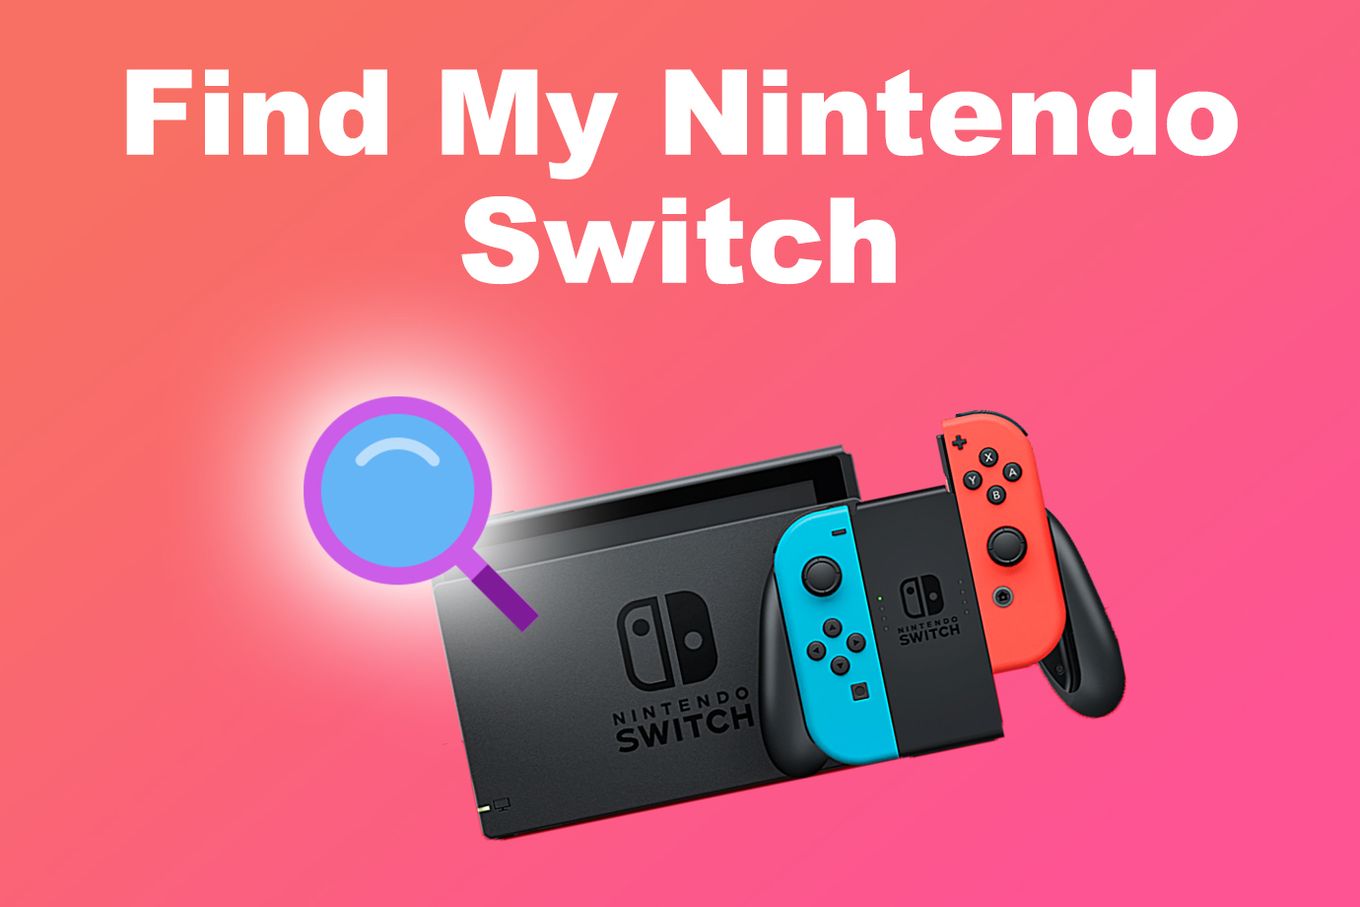 How to Change Your Nintendo Account Sign-In Method Preference, Support